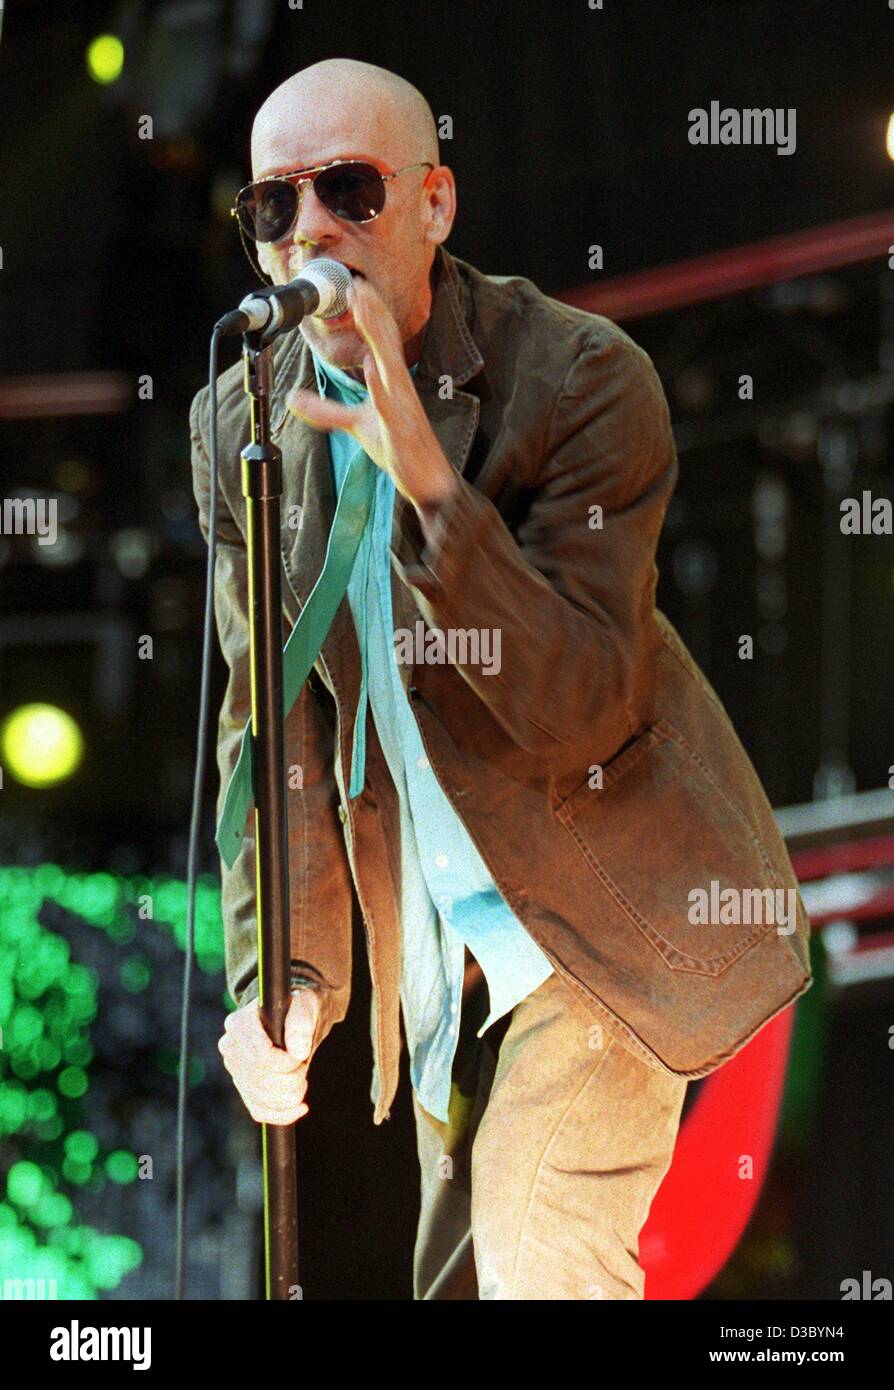 (dpa) - Michael Stipe, frontman of the US band R.E.M., sings during a concert in Wiesbaden, Germany, 19 July 2003. Among other songs, the band performed their hits 'Losing My Religion', 'Daysleeper' and 'It's The End Of The World As We Know It'. Stock Photo